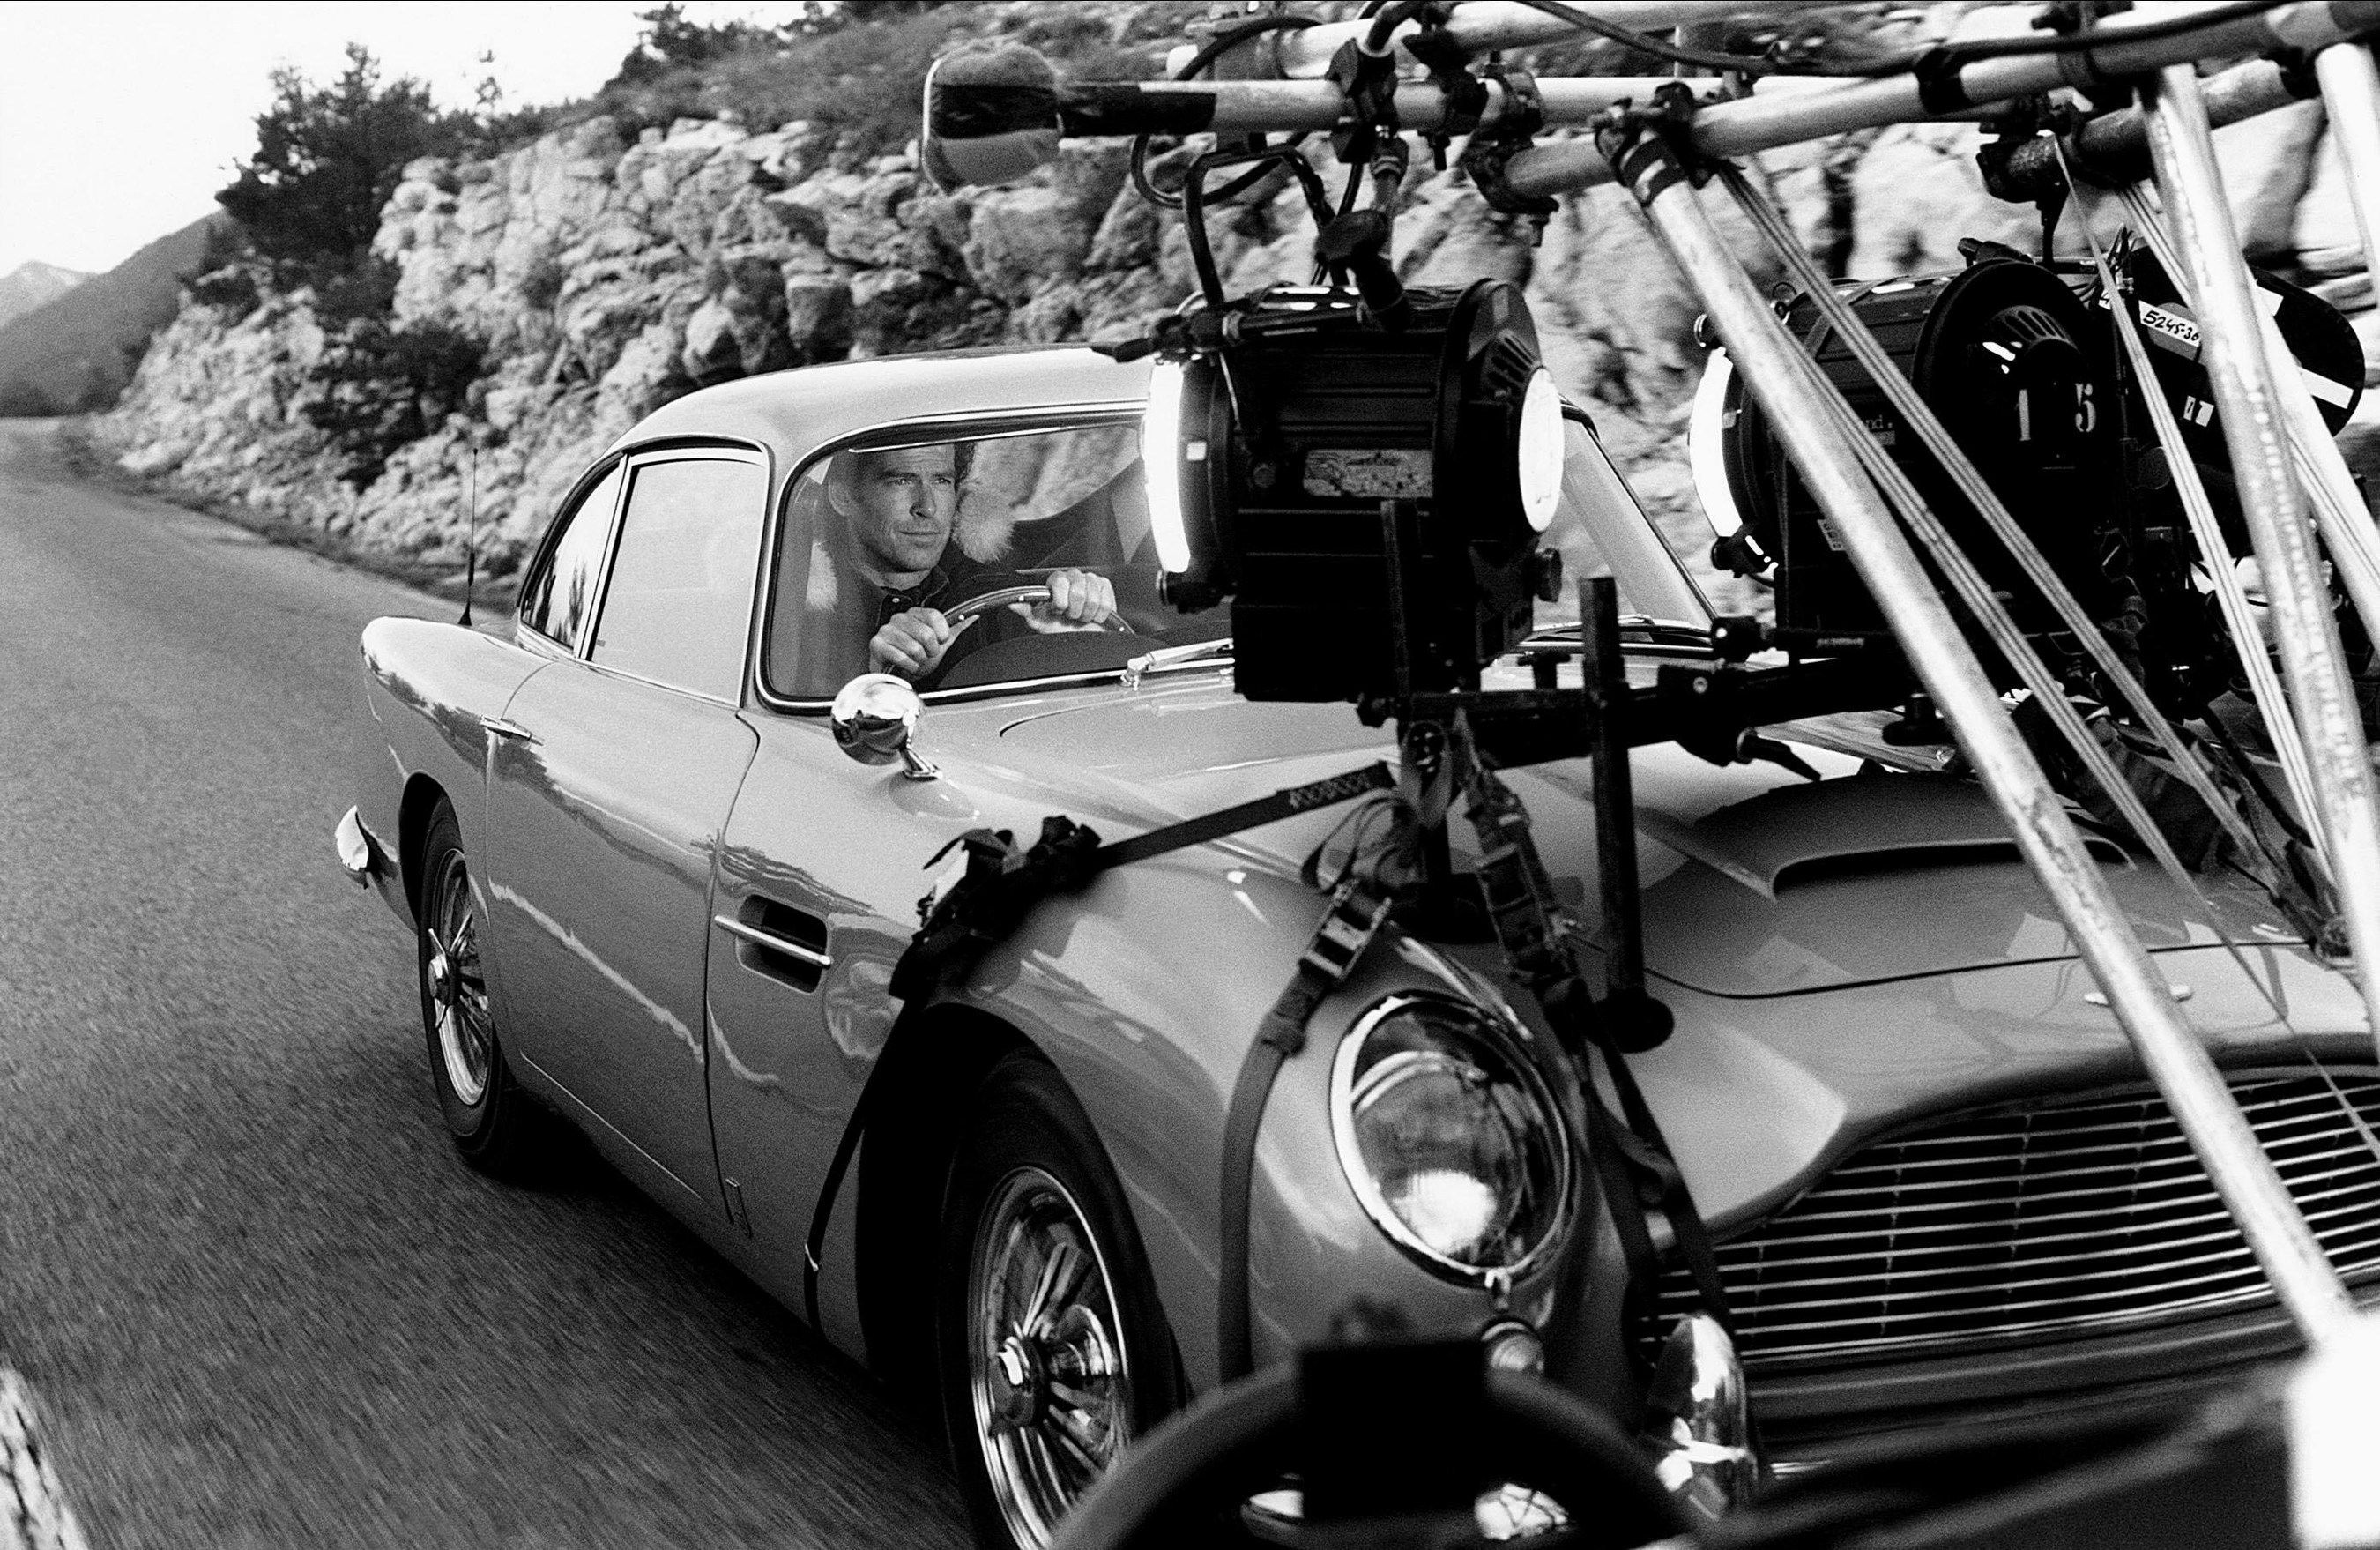 Cameras mounted on the James Bond DB5